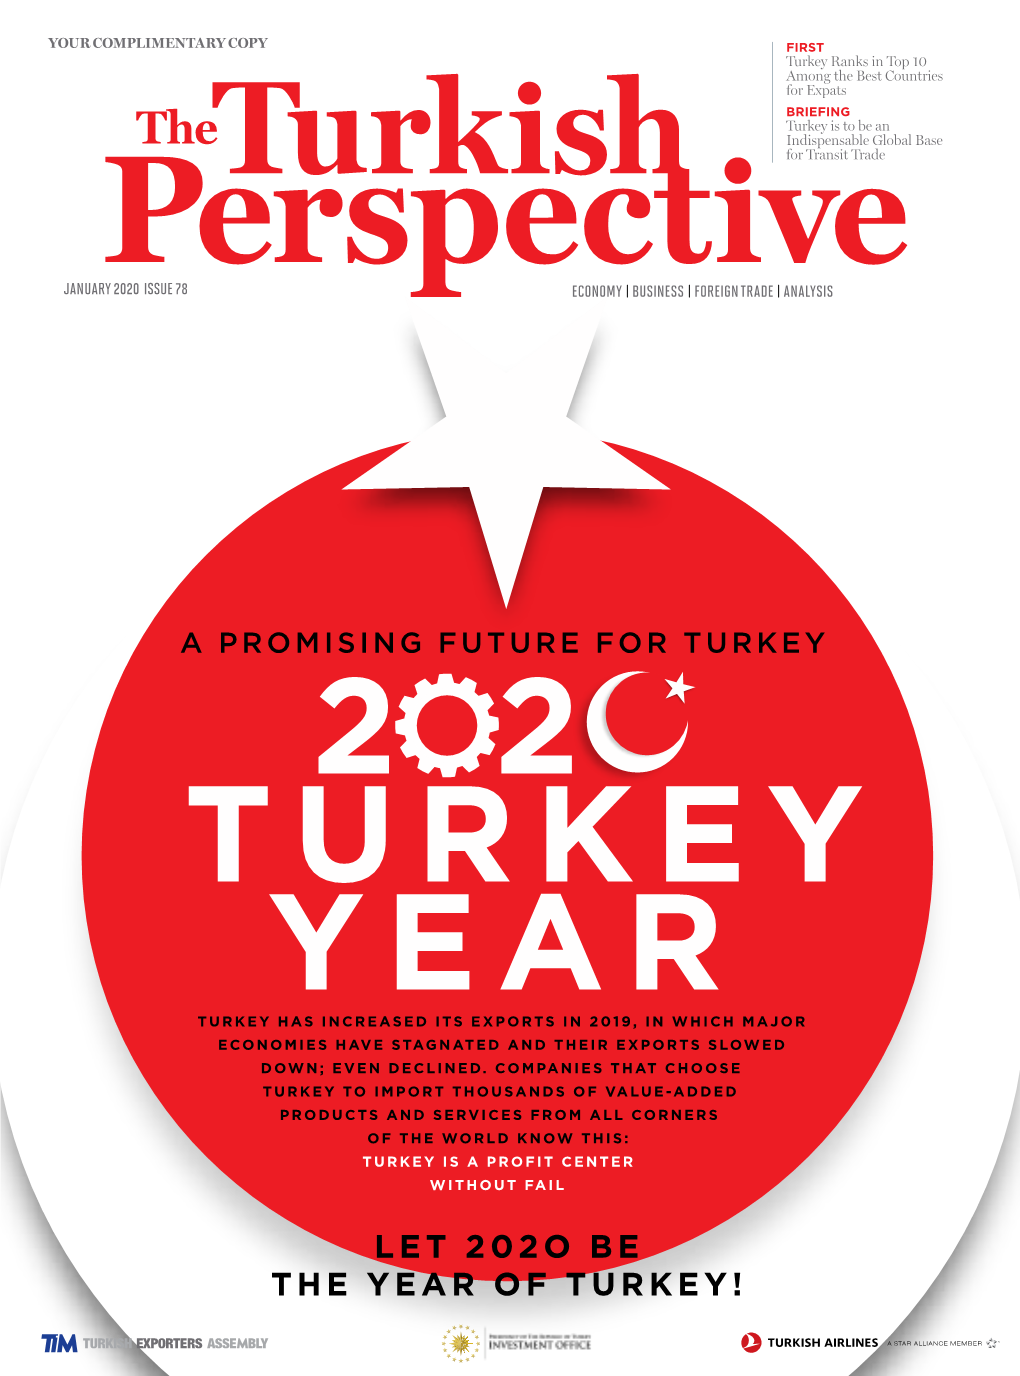 Let 202O Be the Year of Turkey!